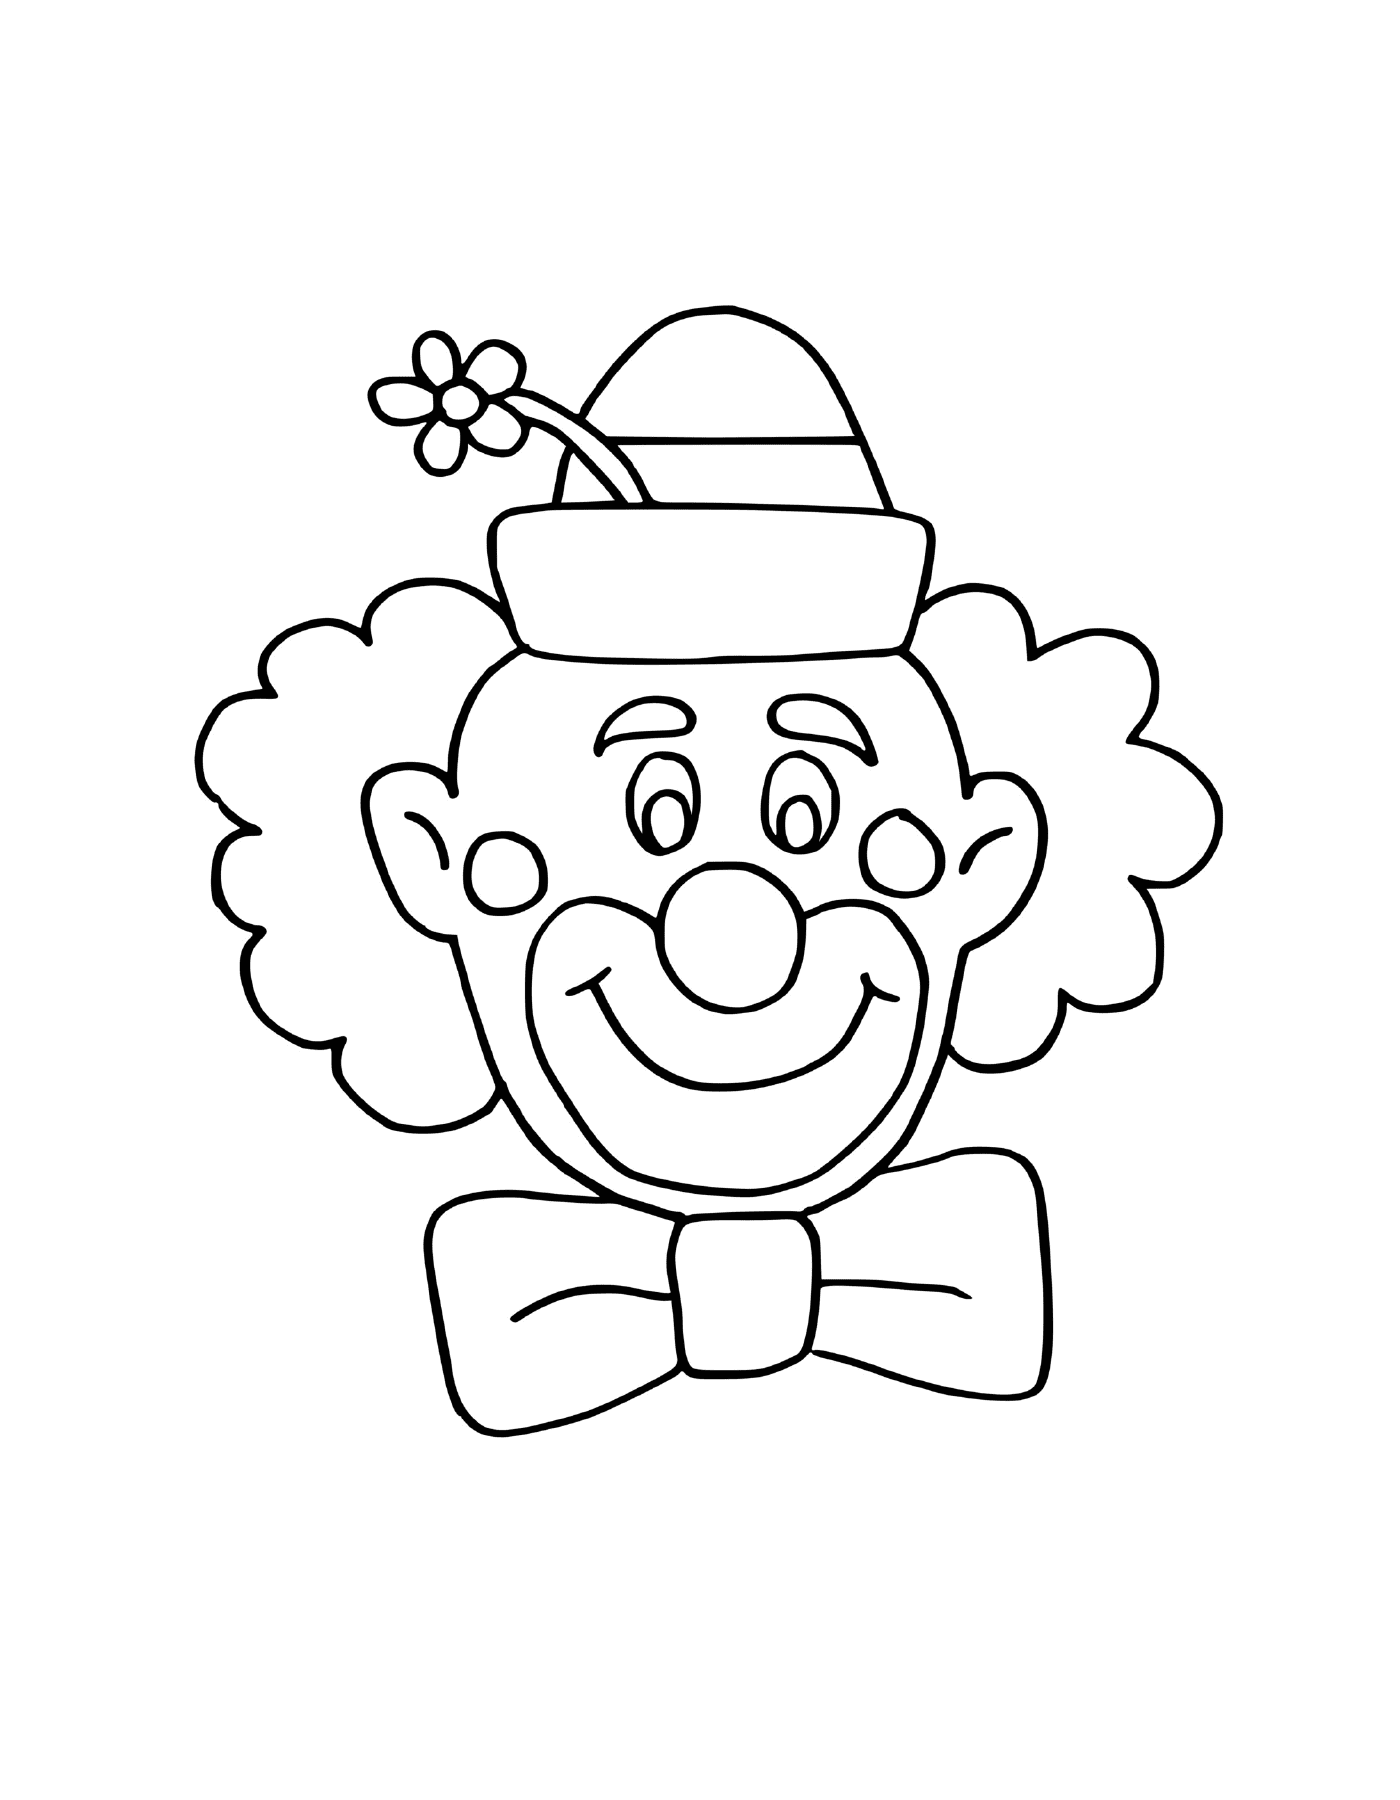  Clown smiling and fun with a flowered hat 